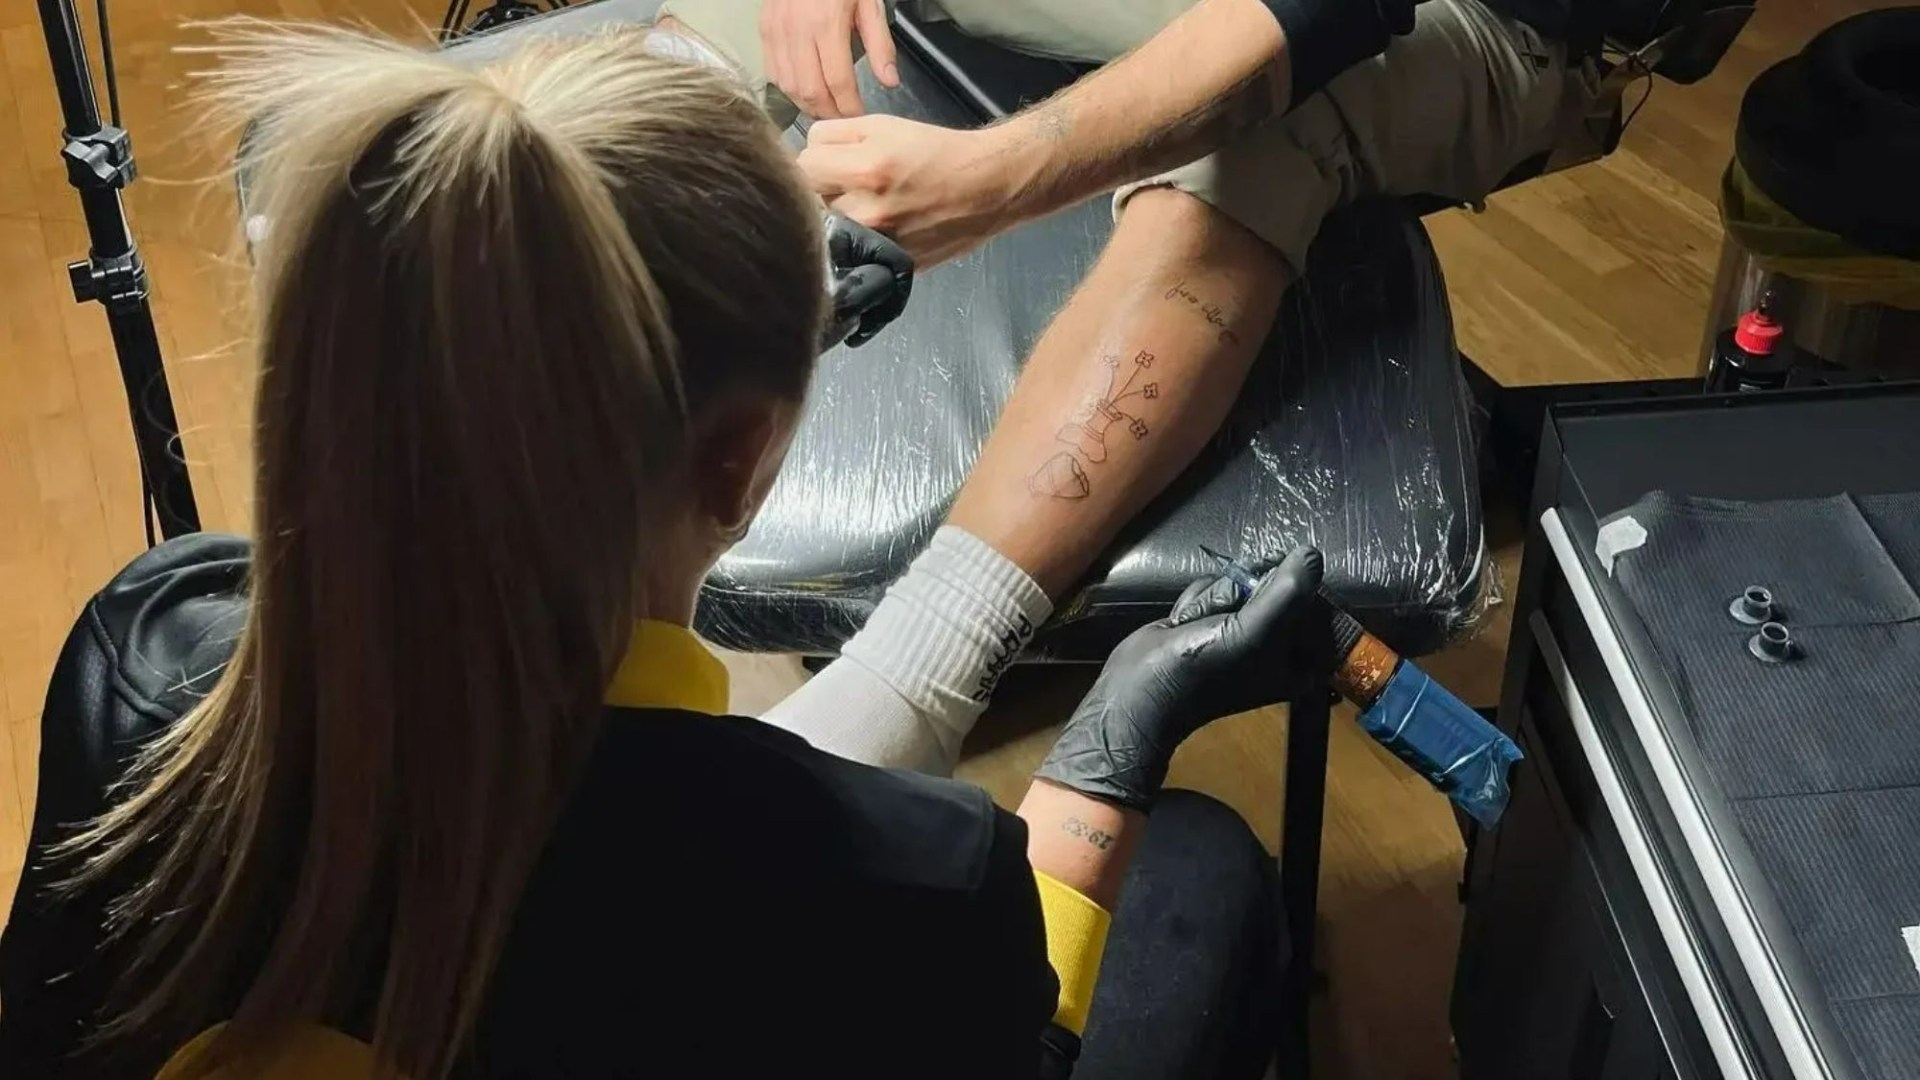 England Lionesses star hints at future career change as she shows off talent as a tattoo artist [Video]